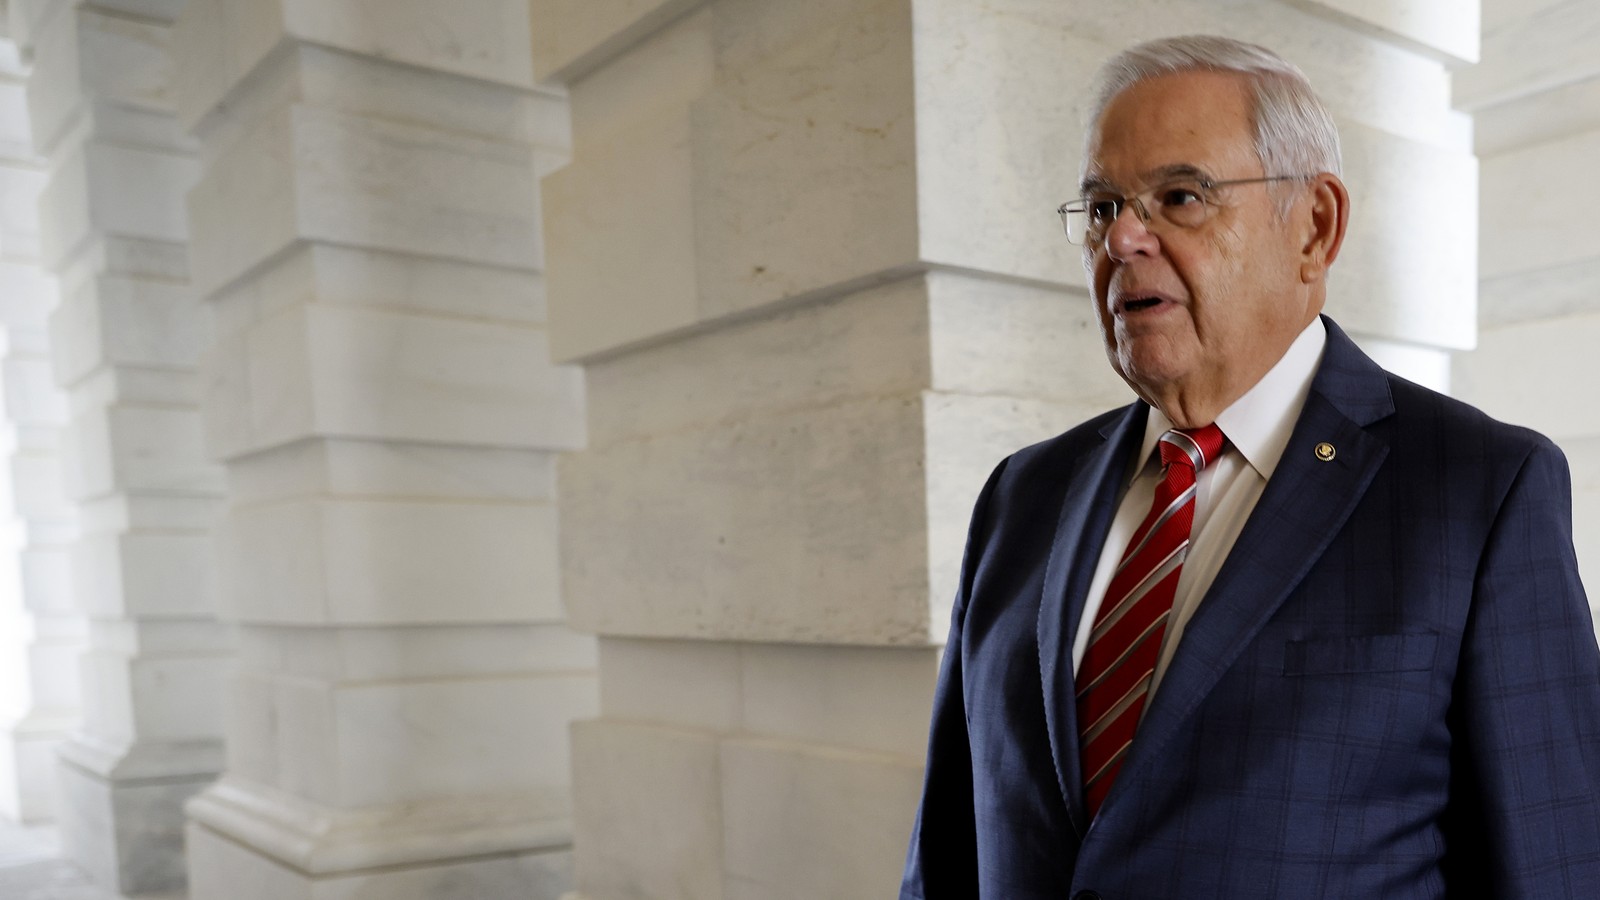 Menendez Indictment: Why Gold Is an Eye-Popping Part of the